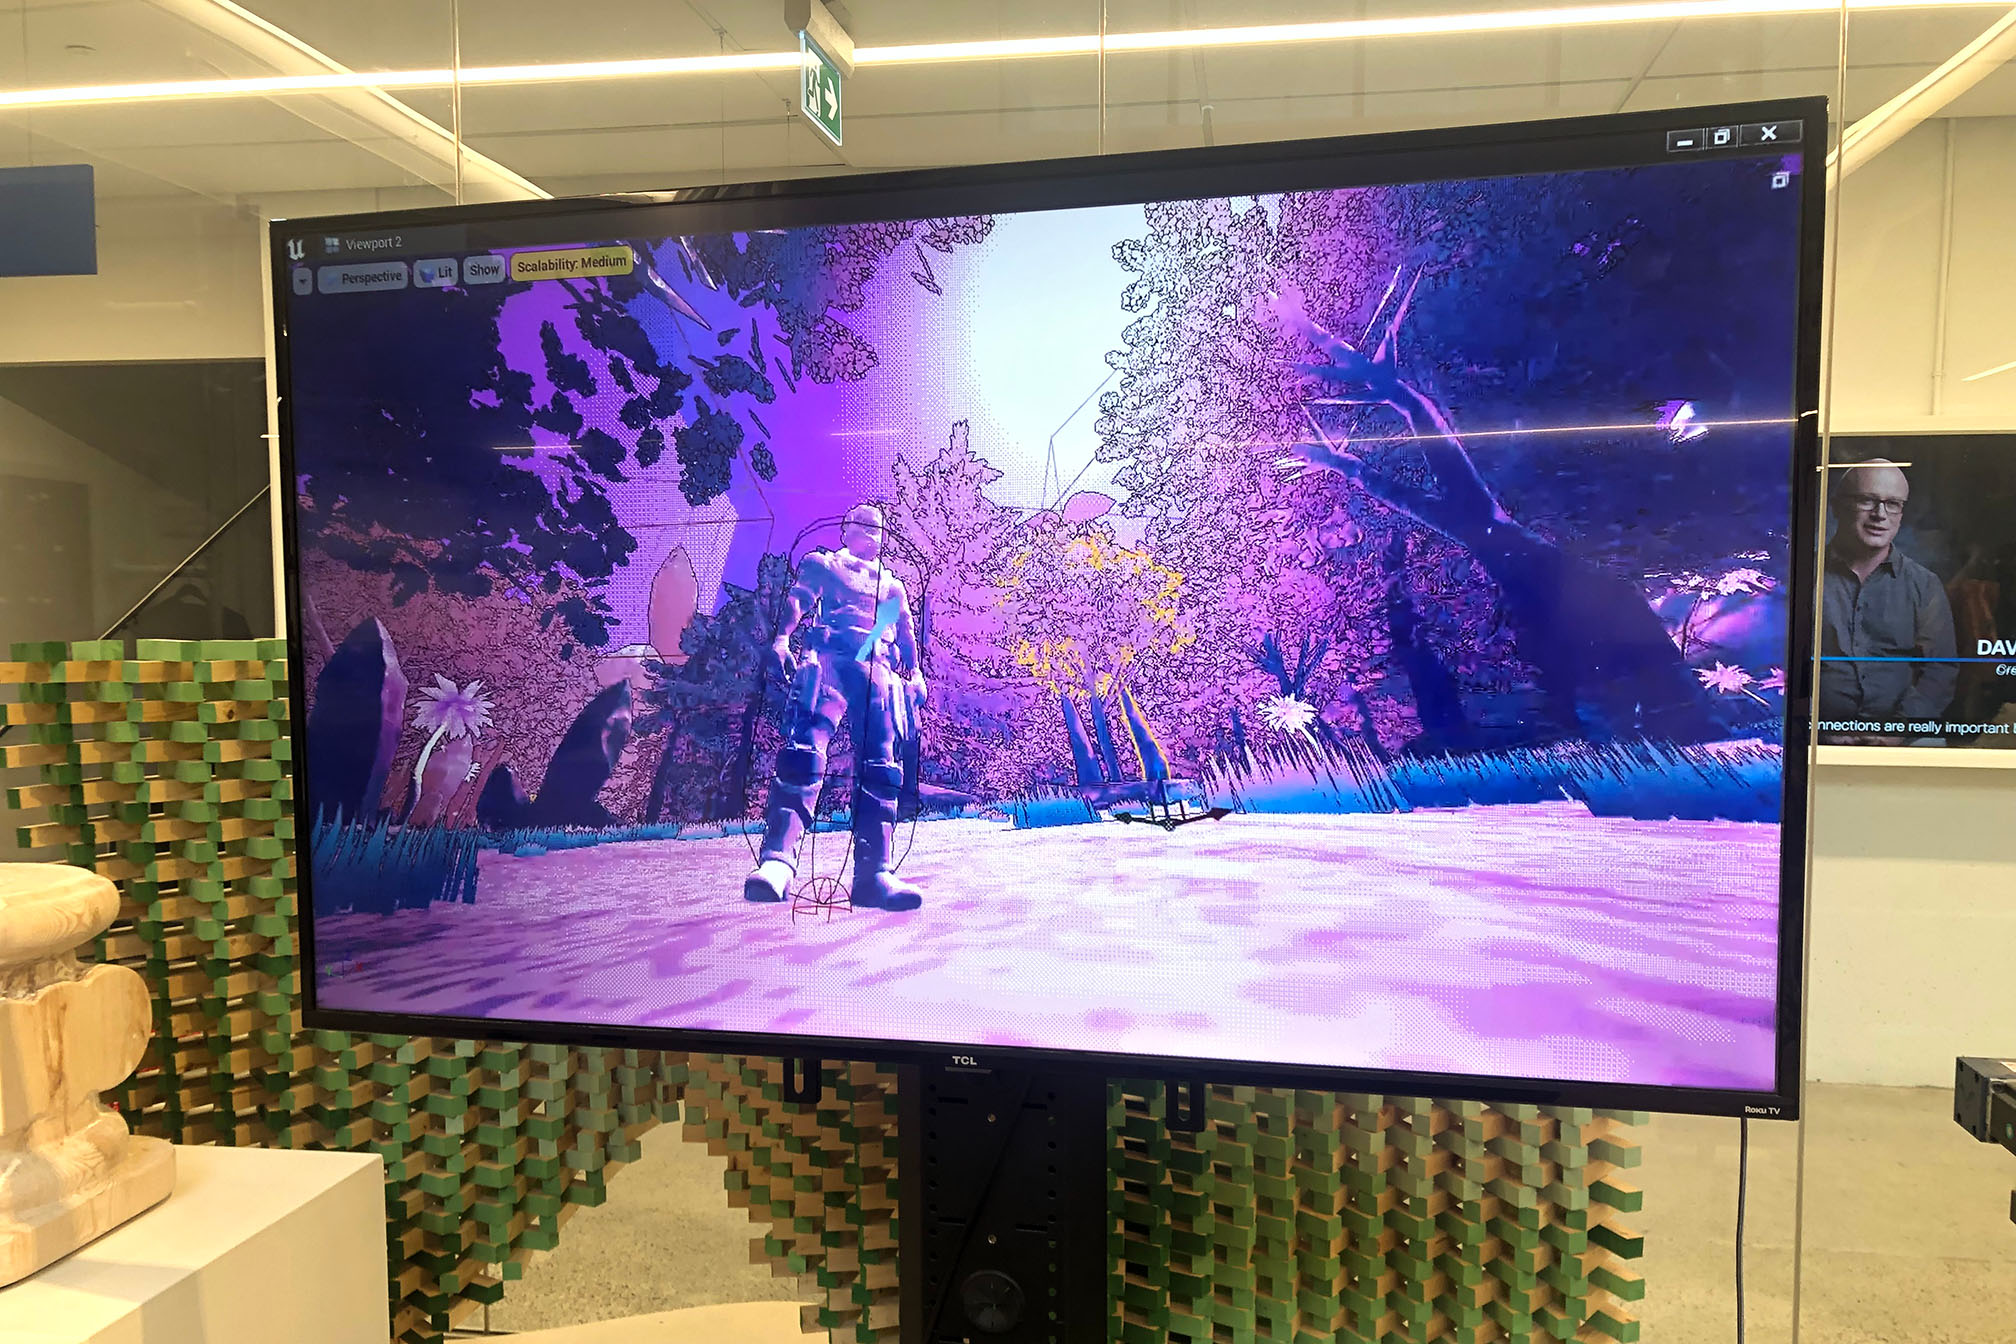 Picture of a screen showing a blue and purple virtual environment. There is a blobby character in the center of the screen. 